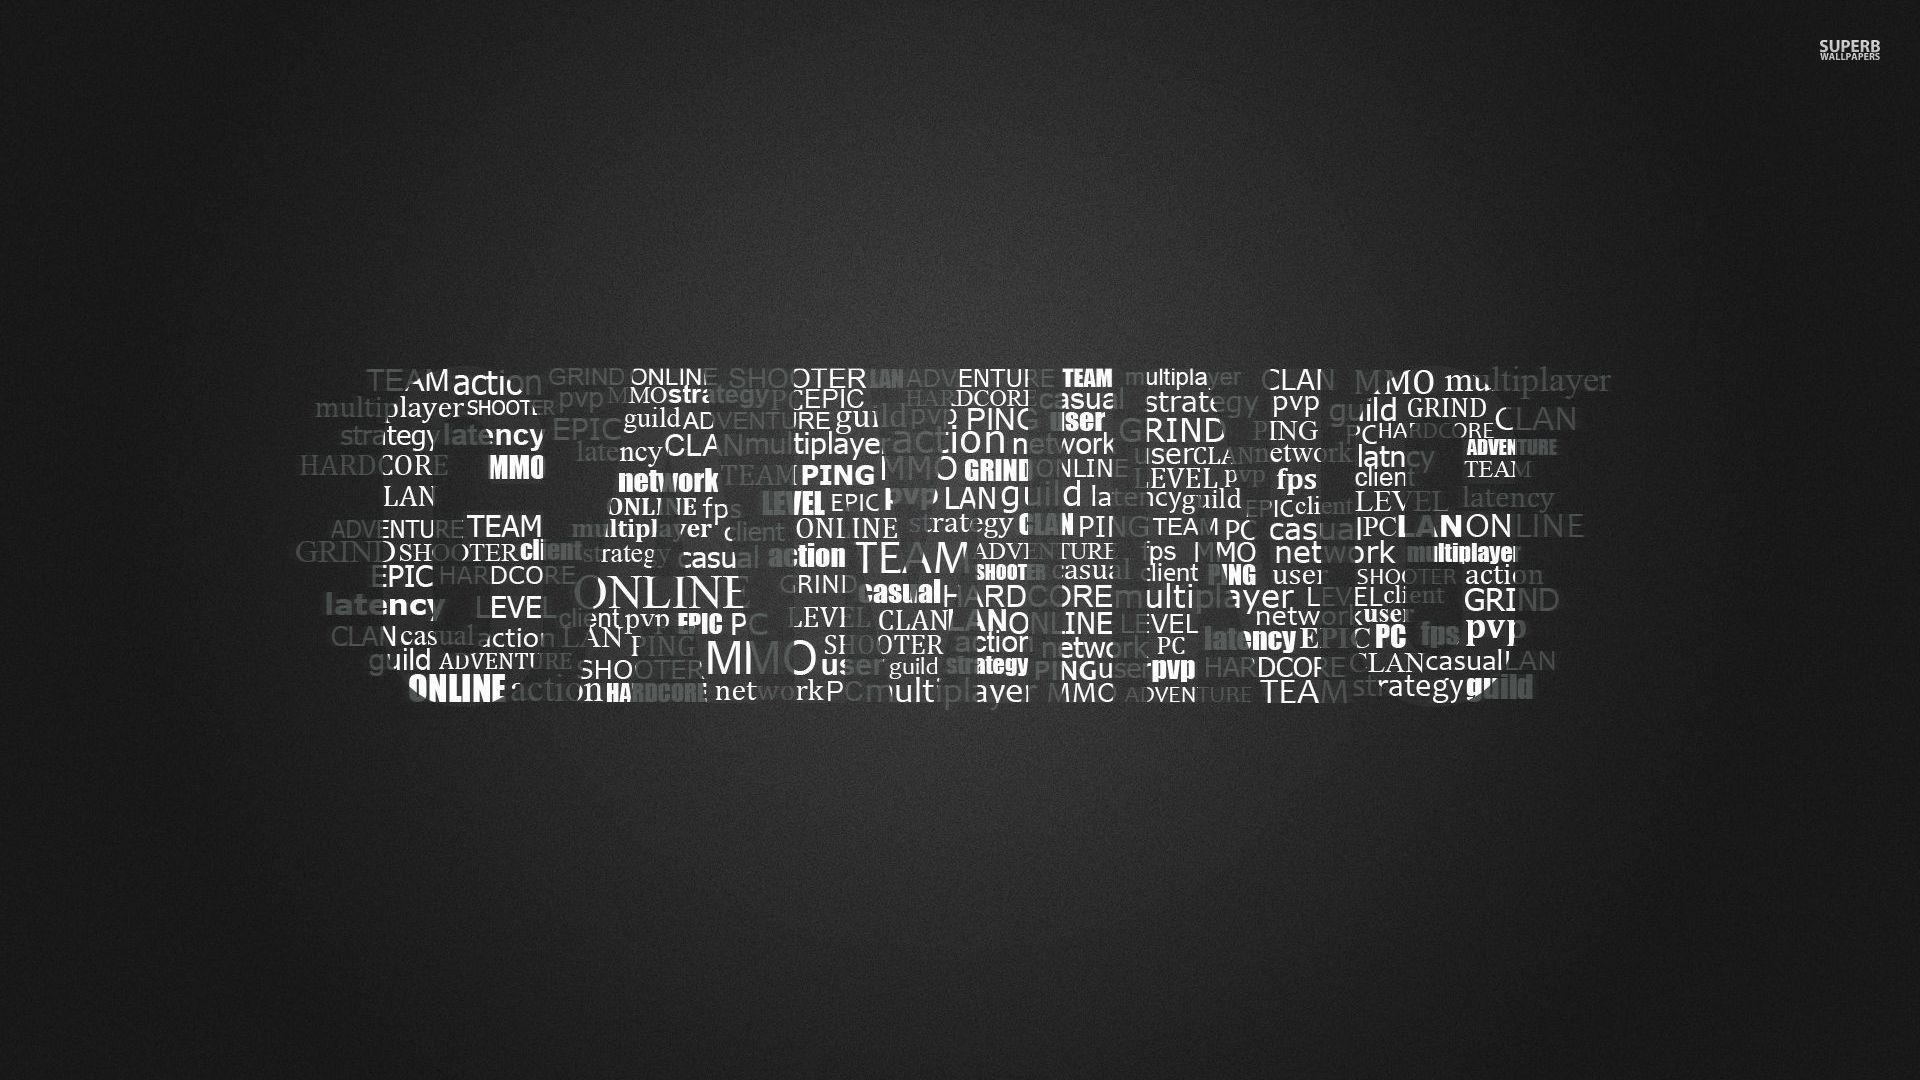 Top Gamers Wallpaper Walldevil Best Free Hd Desktop And Mobile 1920x1080